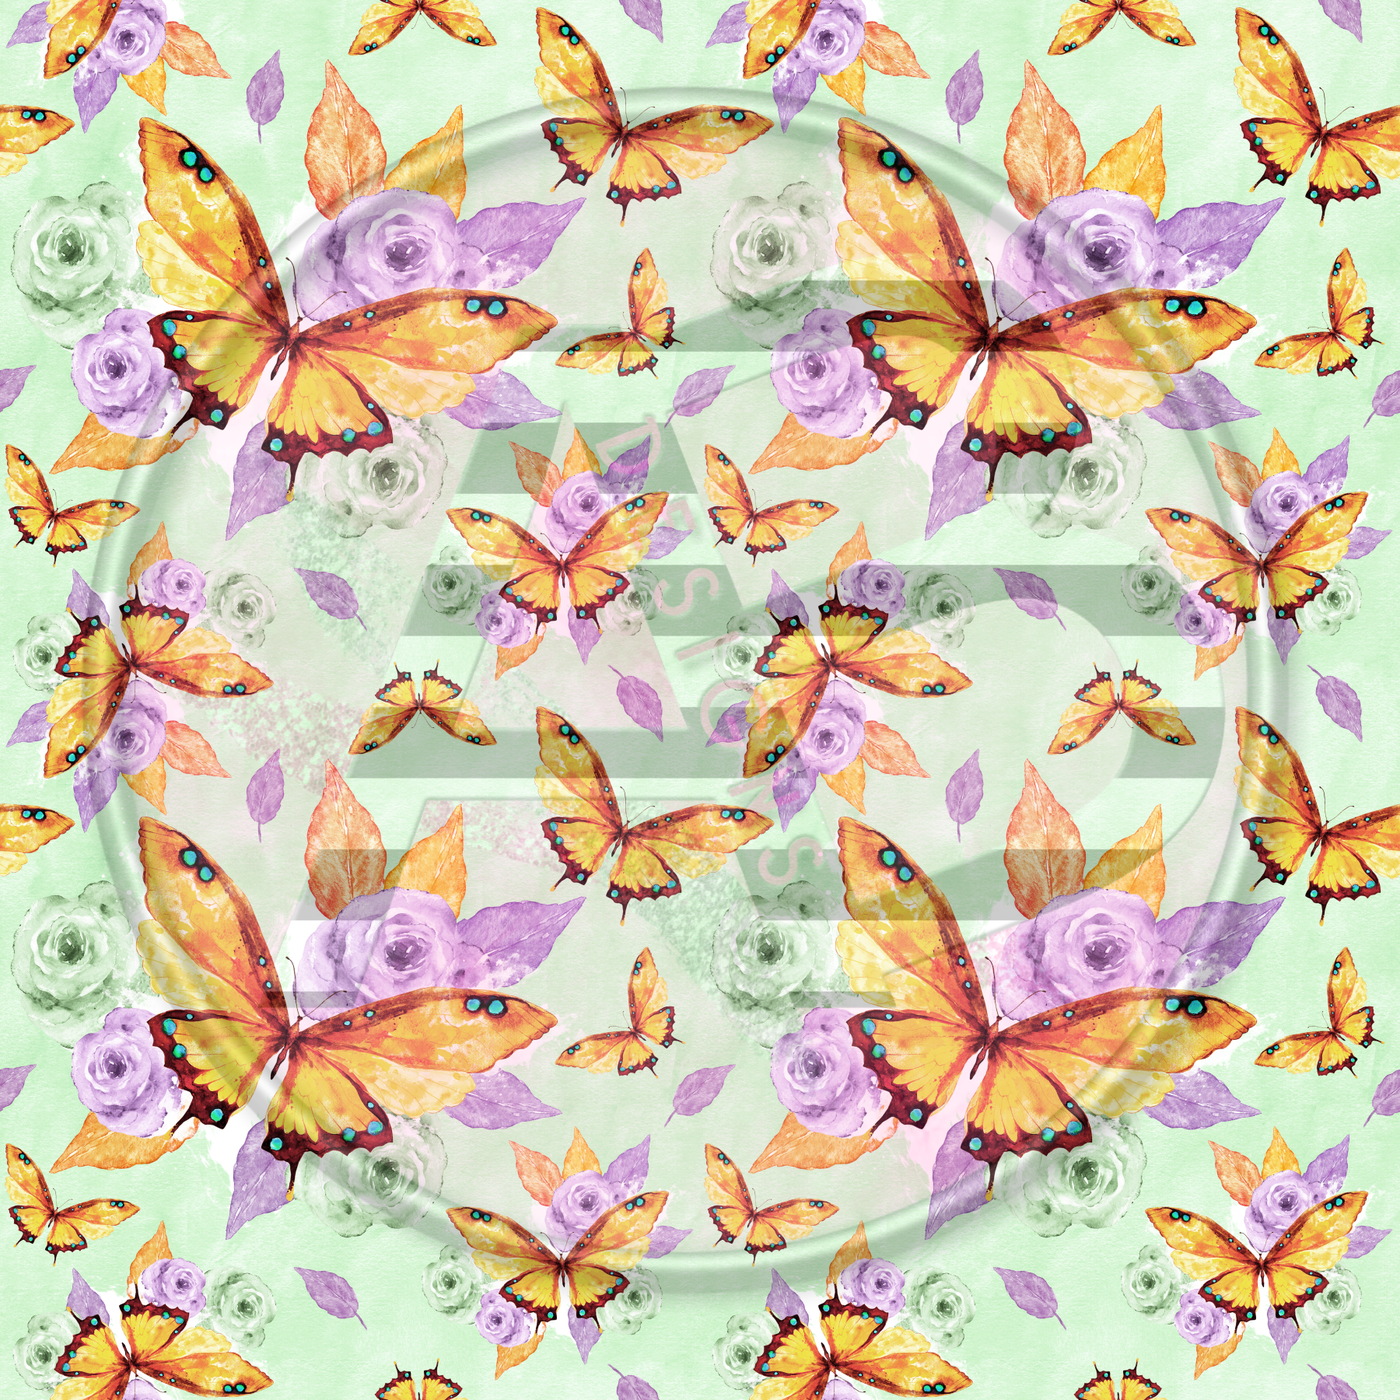 Adhesive Patterned Vinyl - Butterfly 15 Smaller